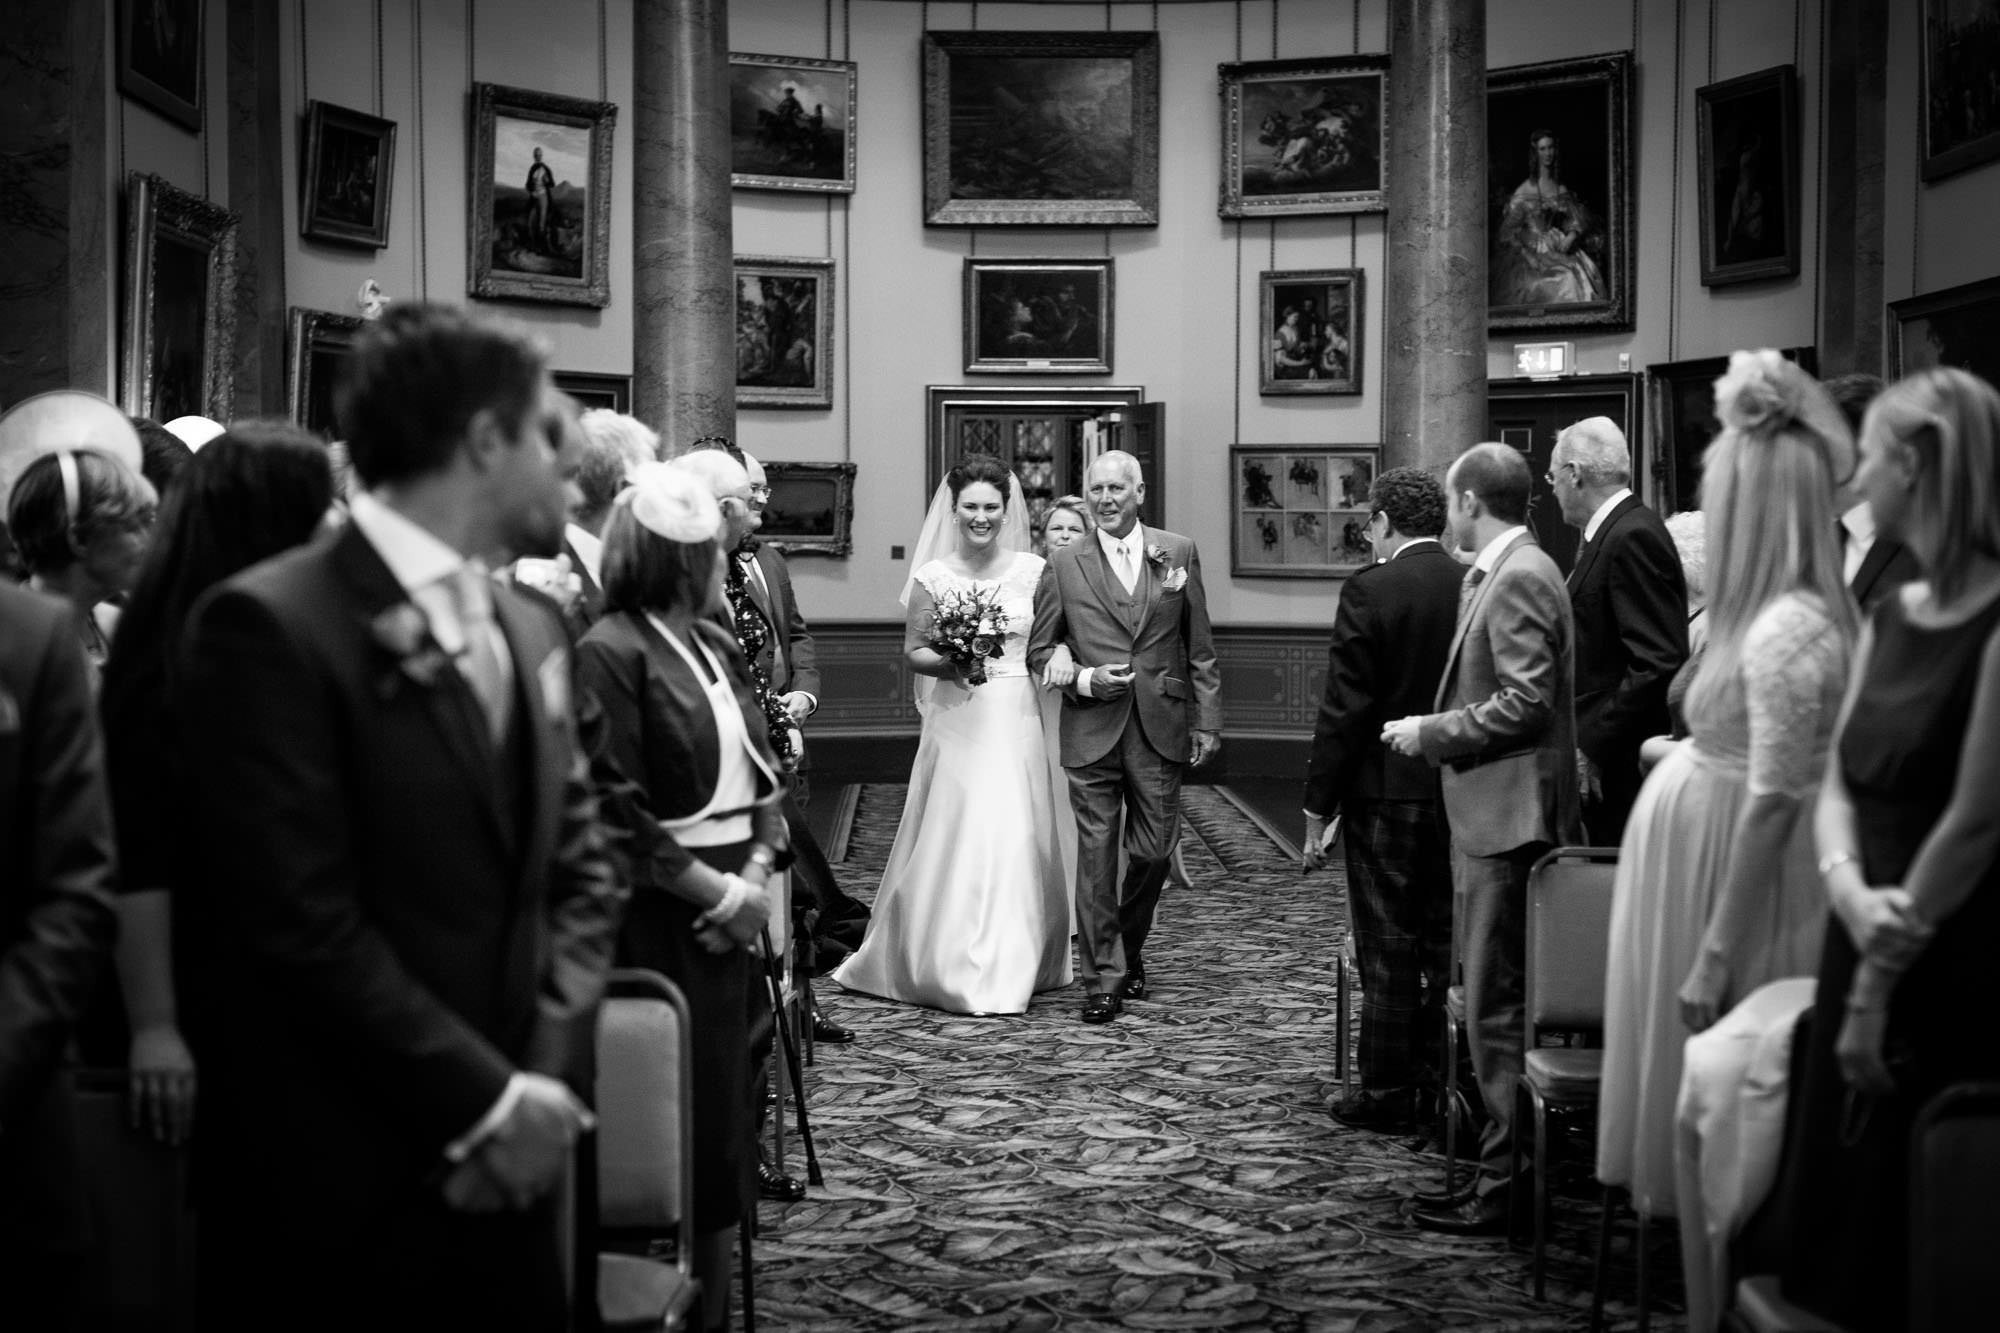 Paxton House Wedding Photography - Wedding ceremony in The Picture Gallery.